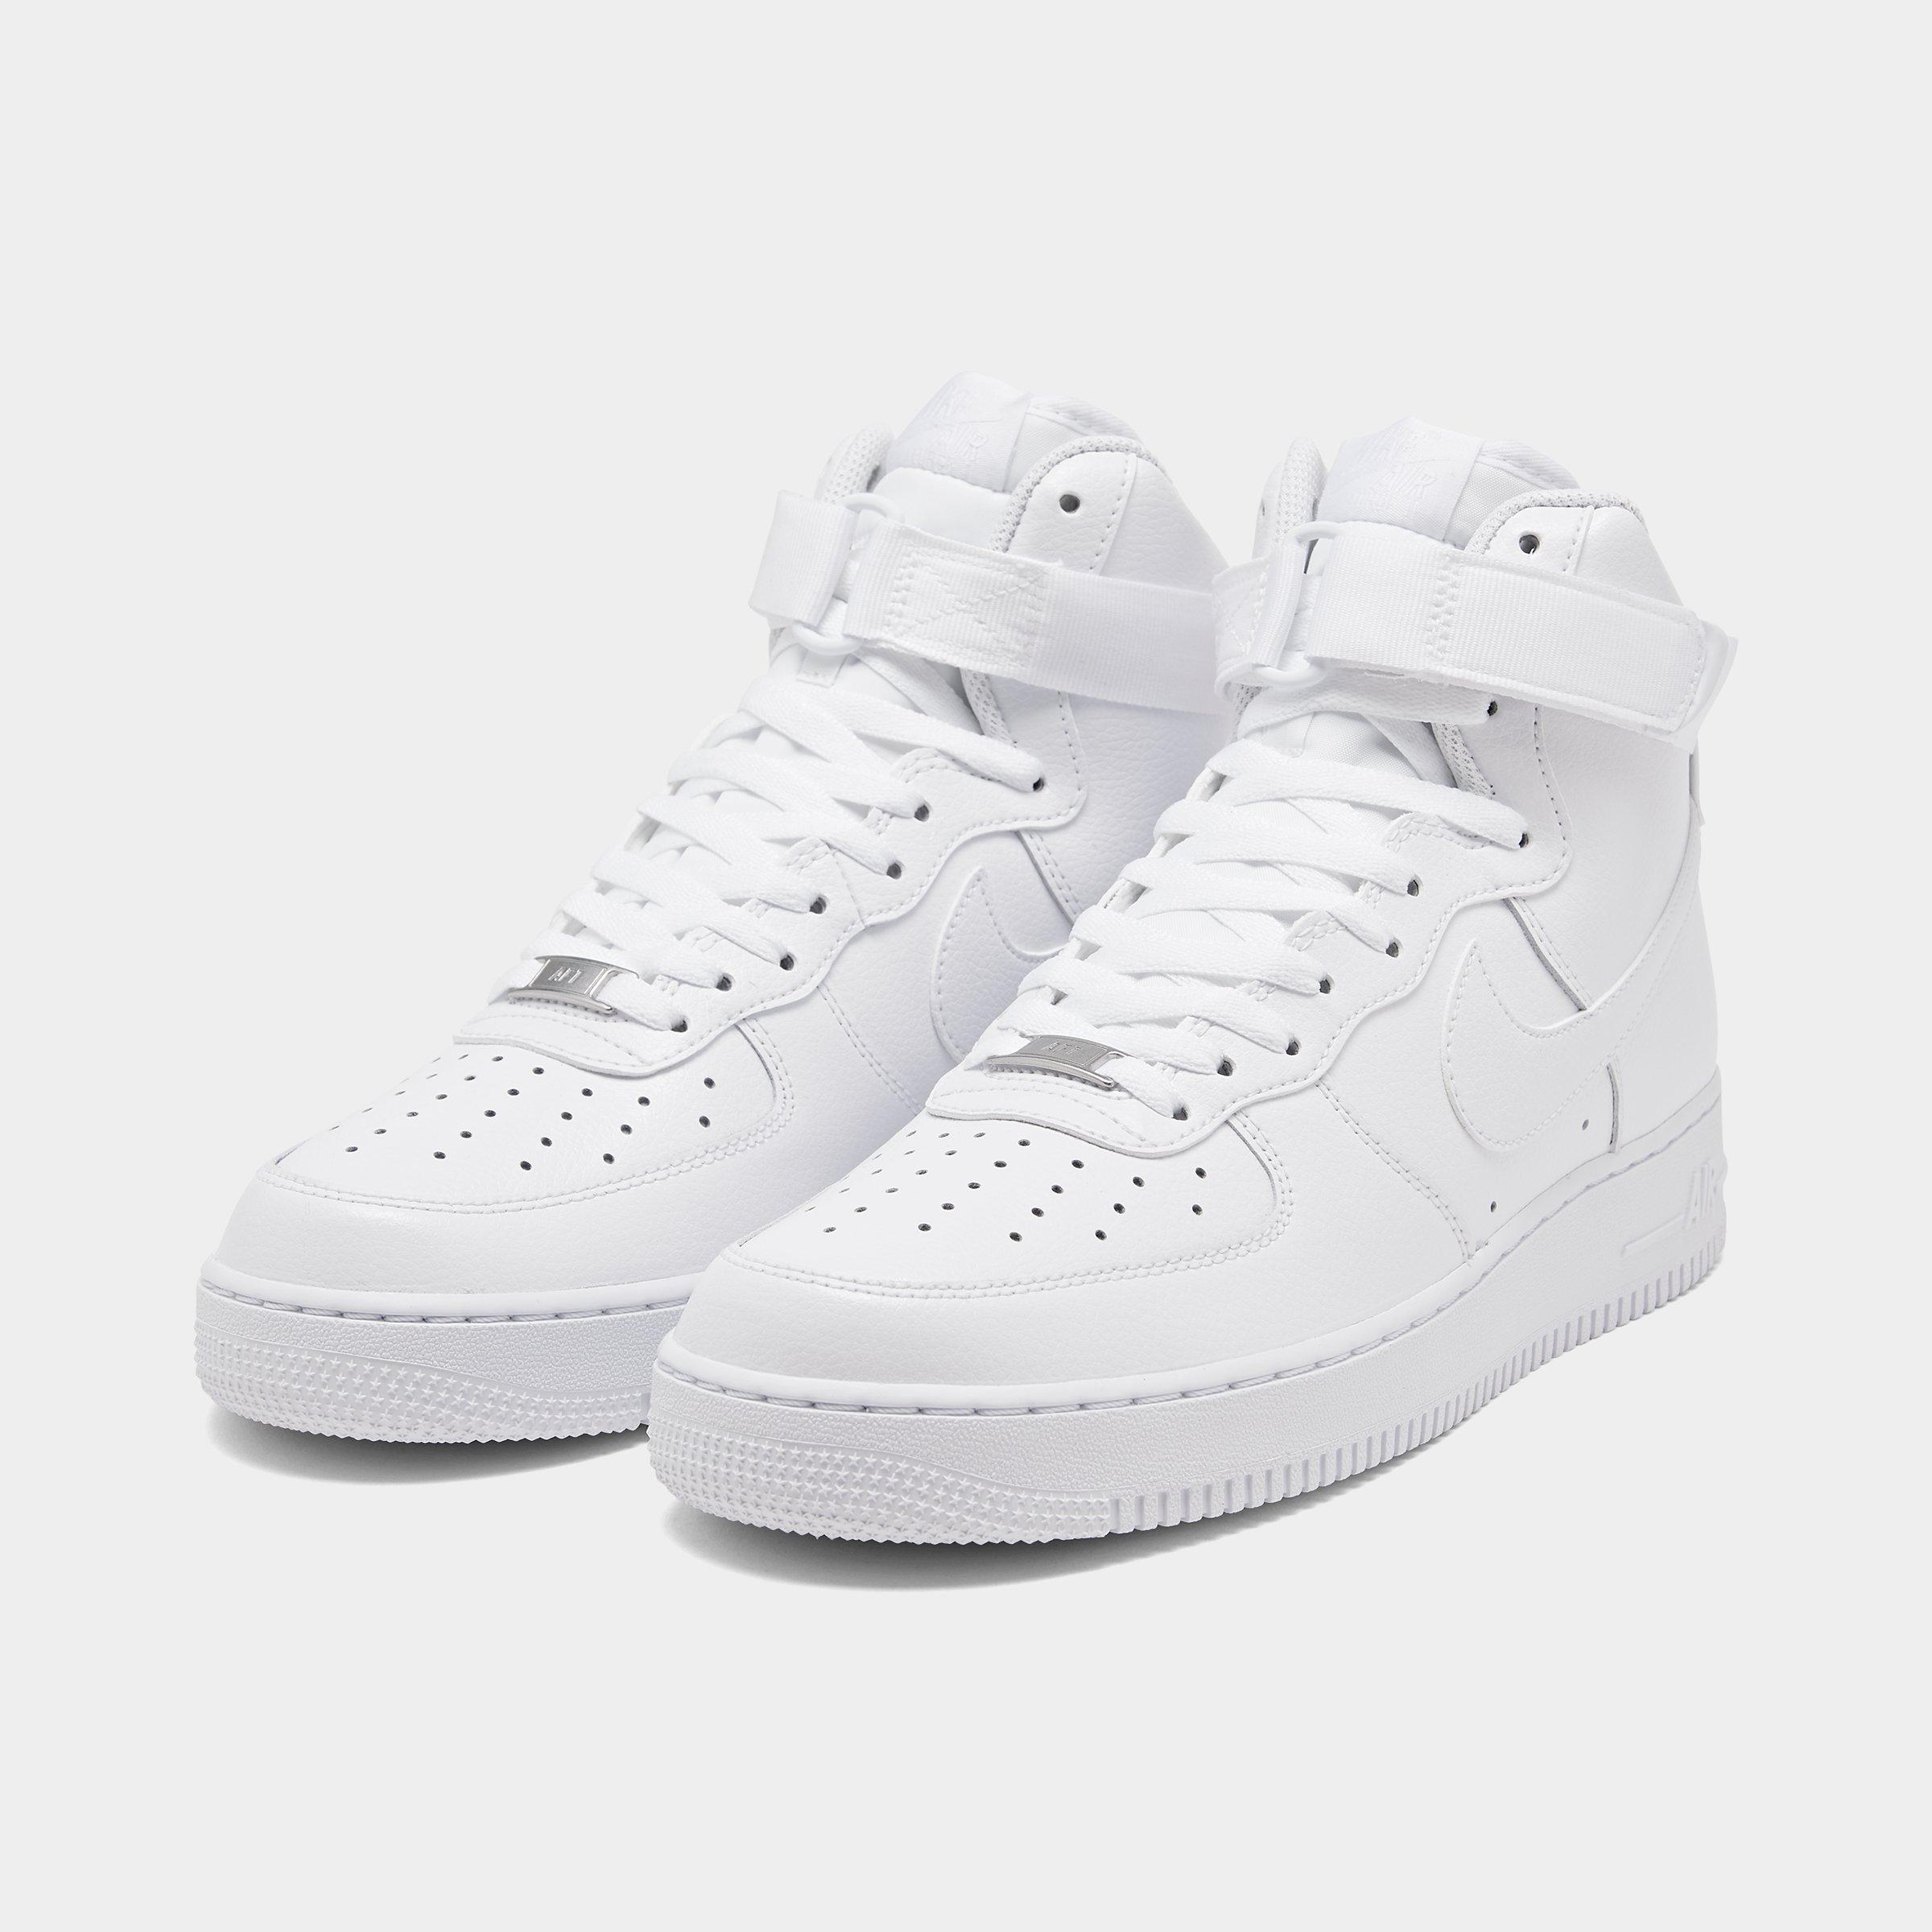 finish line air force 1 high top